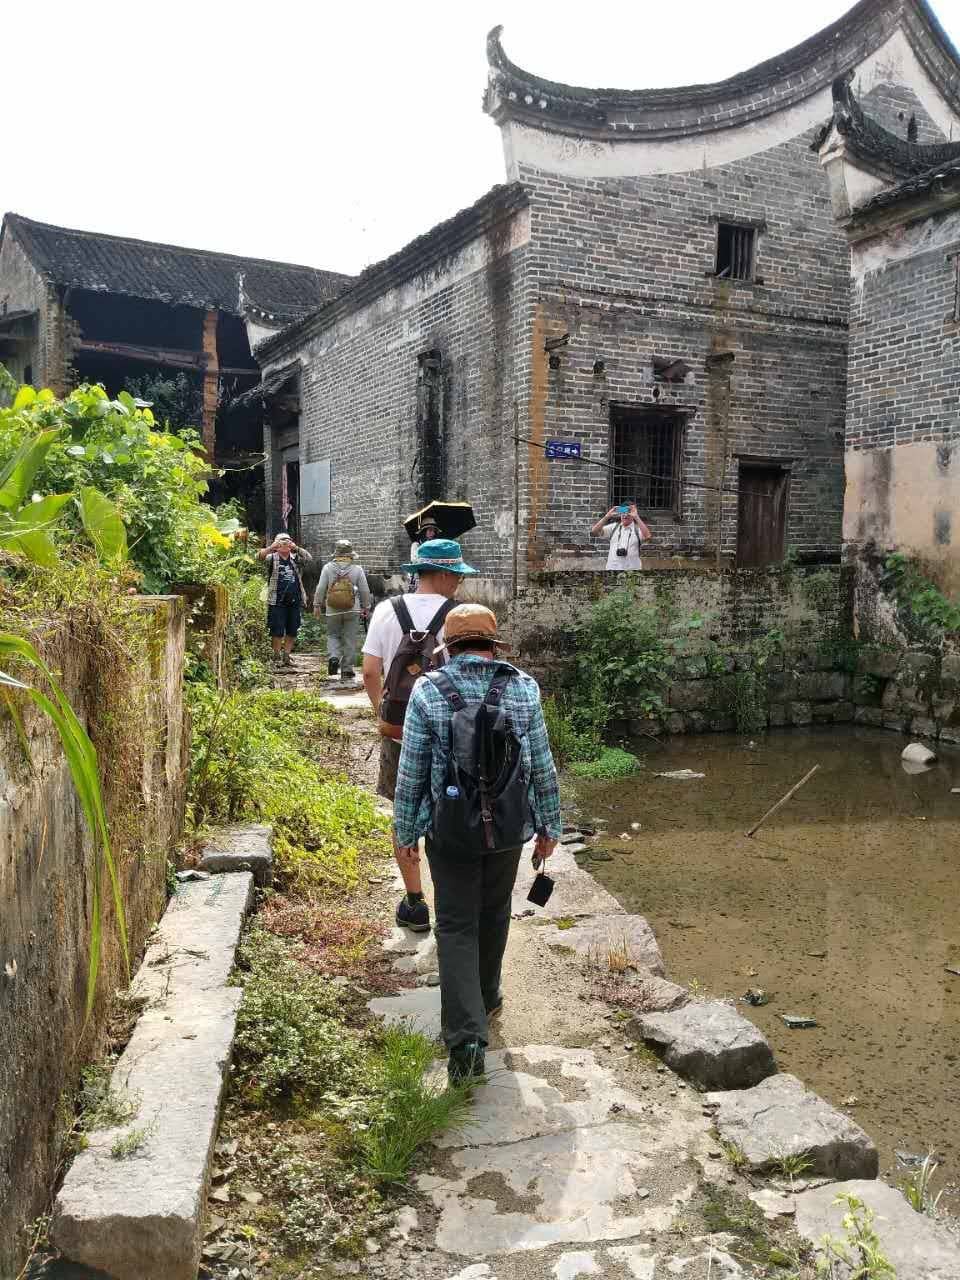 This is the last village we visited during our trip in Qingyuan 😀